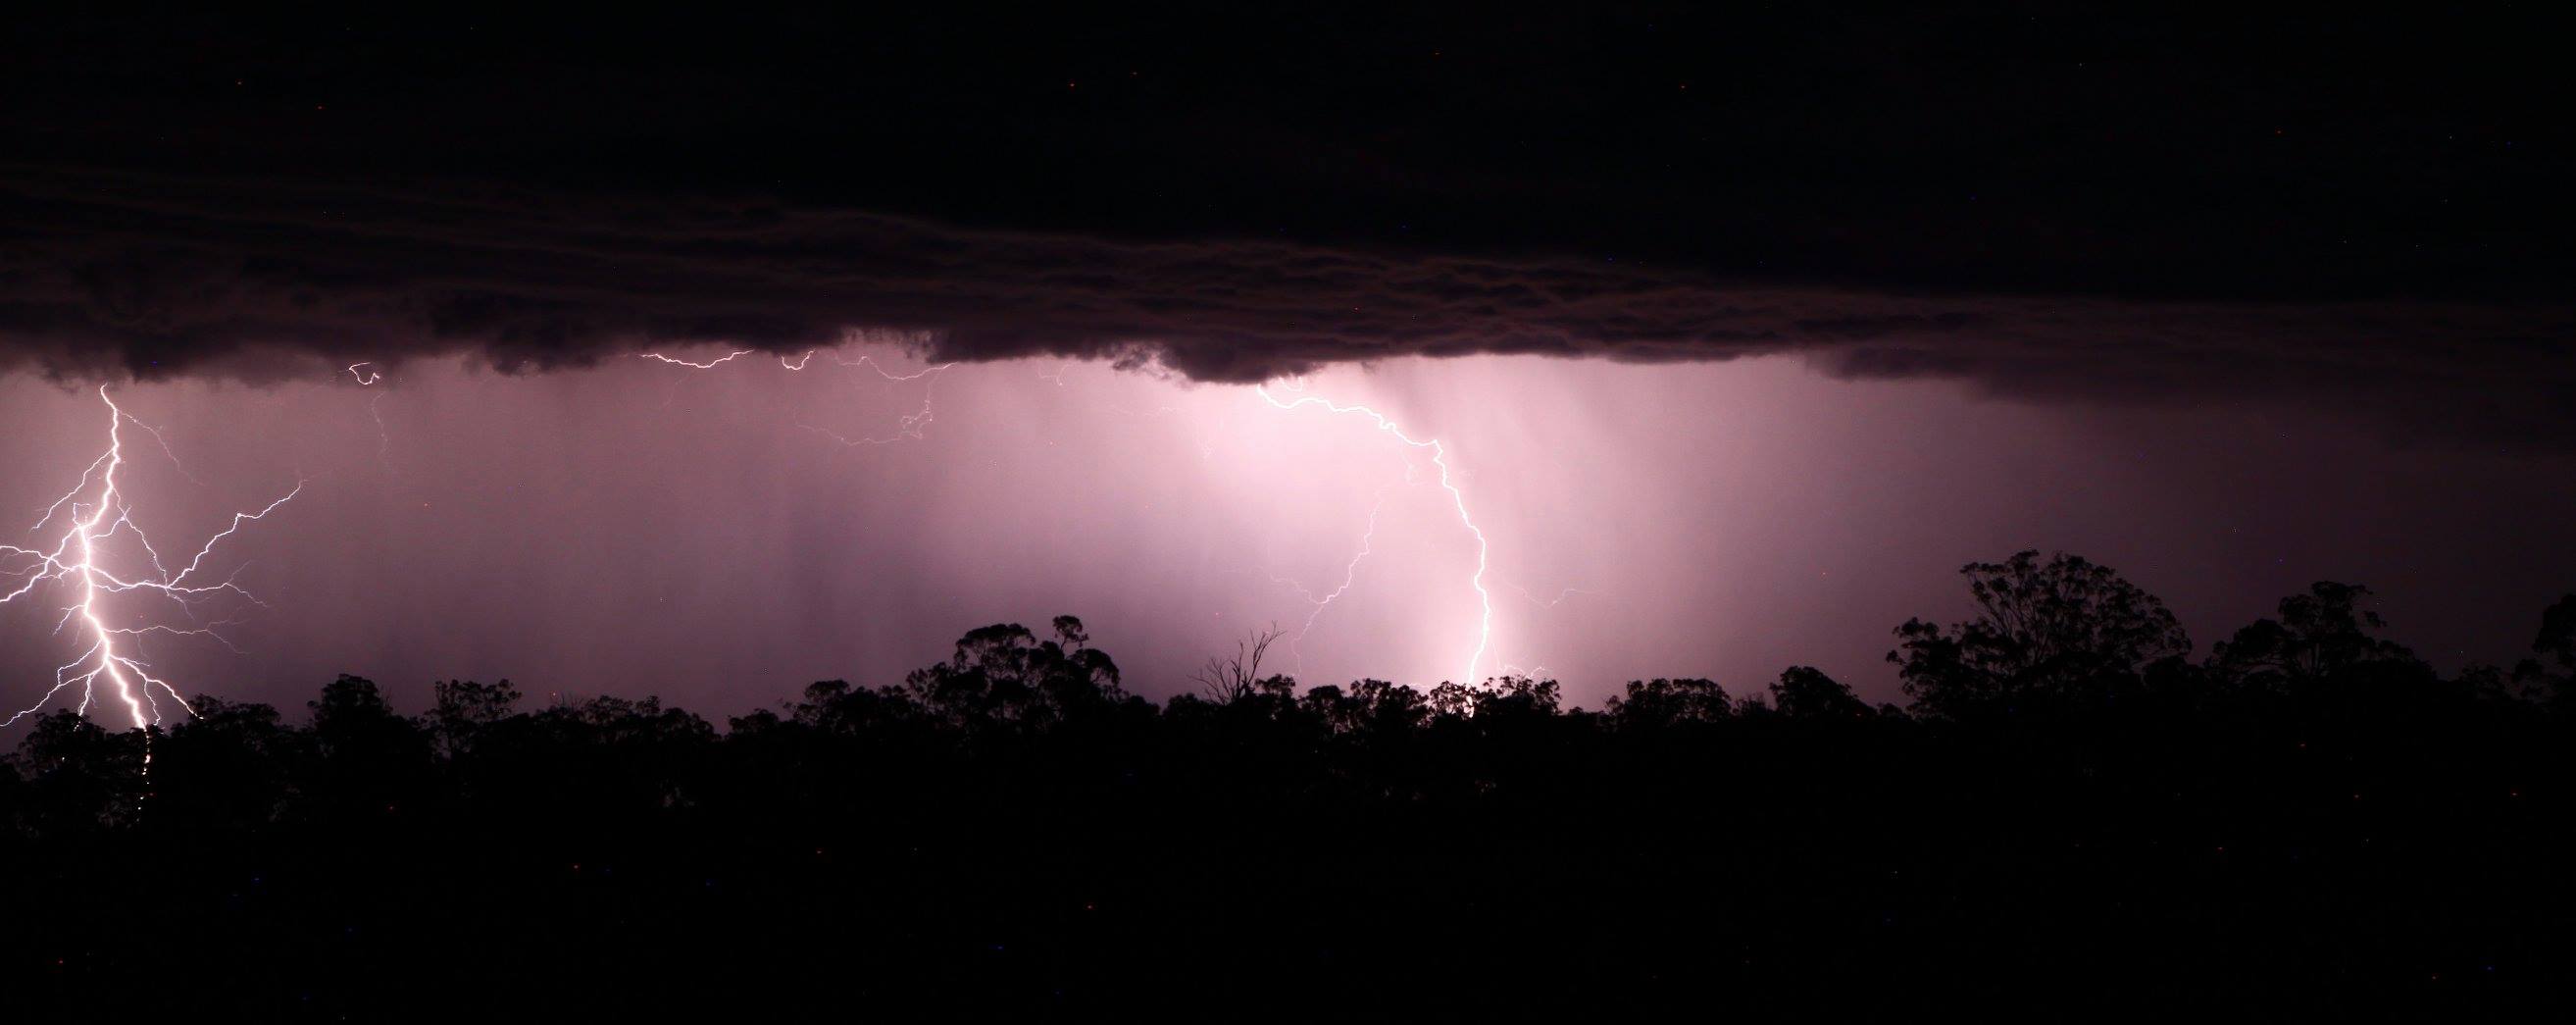 Storms and Lightning Warwick Queensland 21st December 2016 - Extreme Storms2627 x 1045